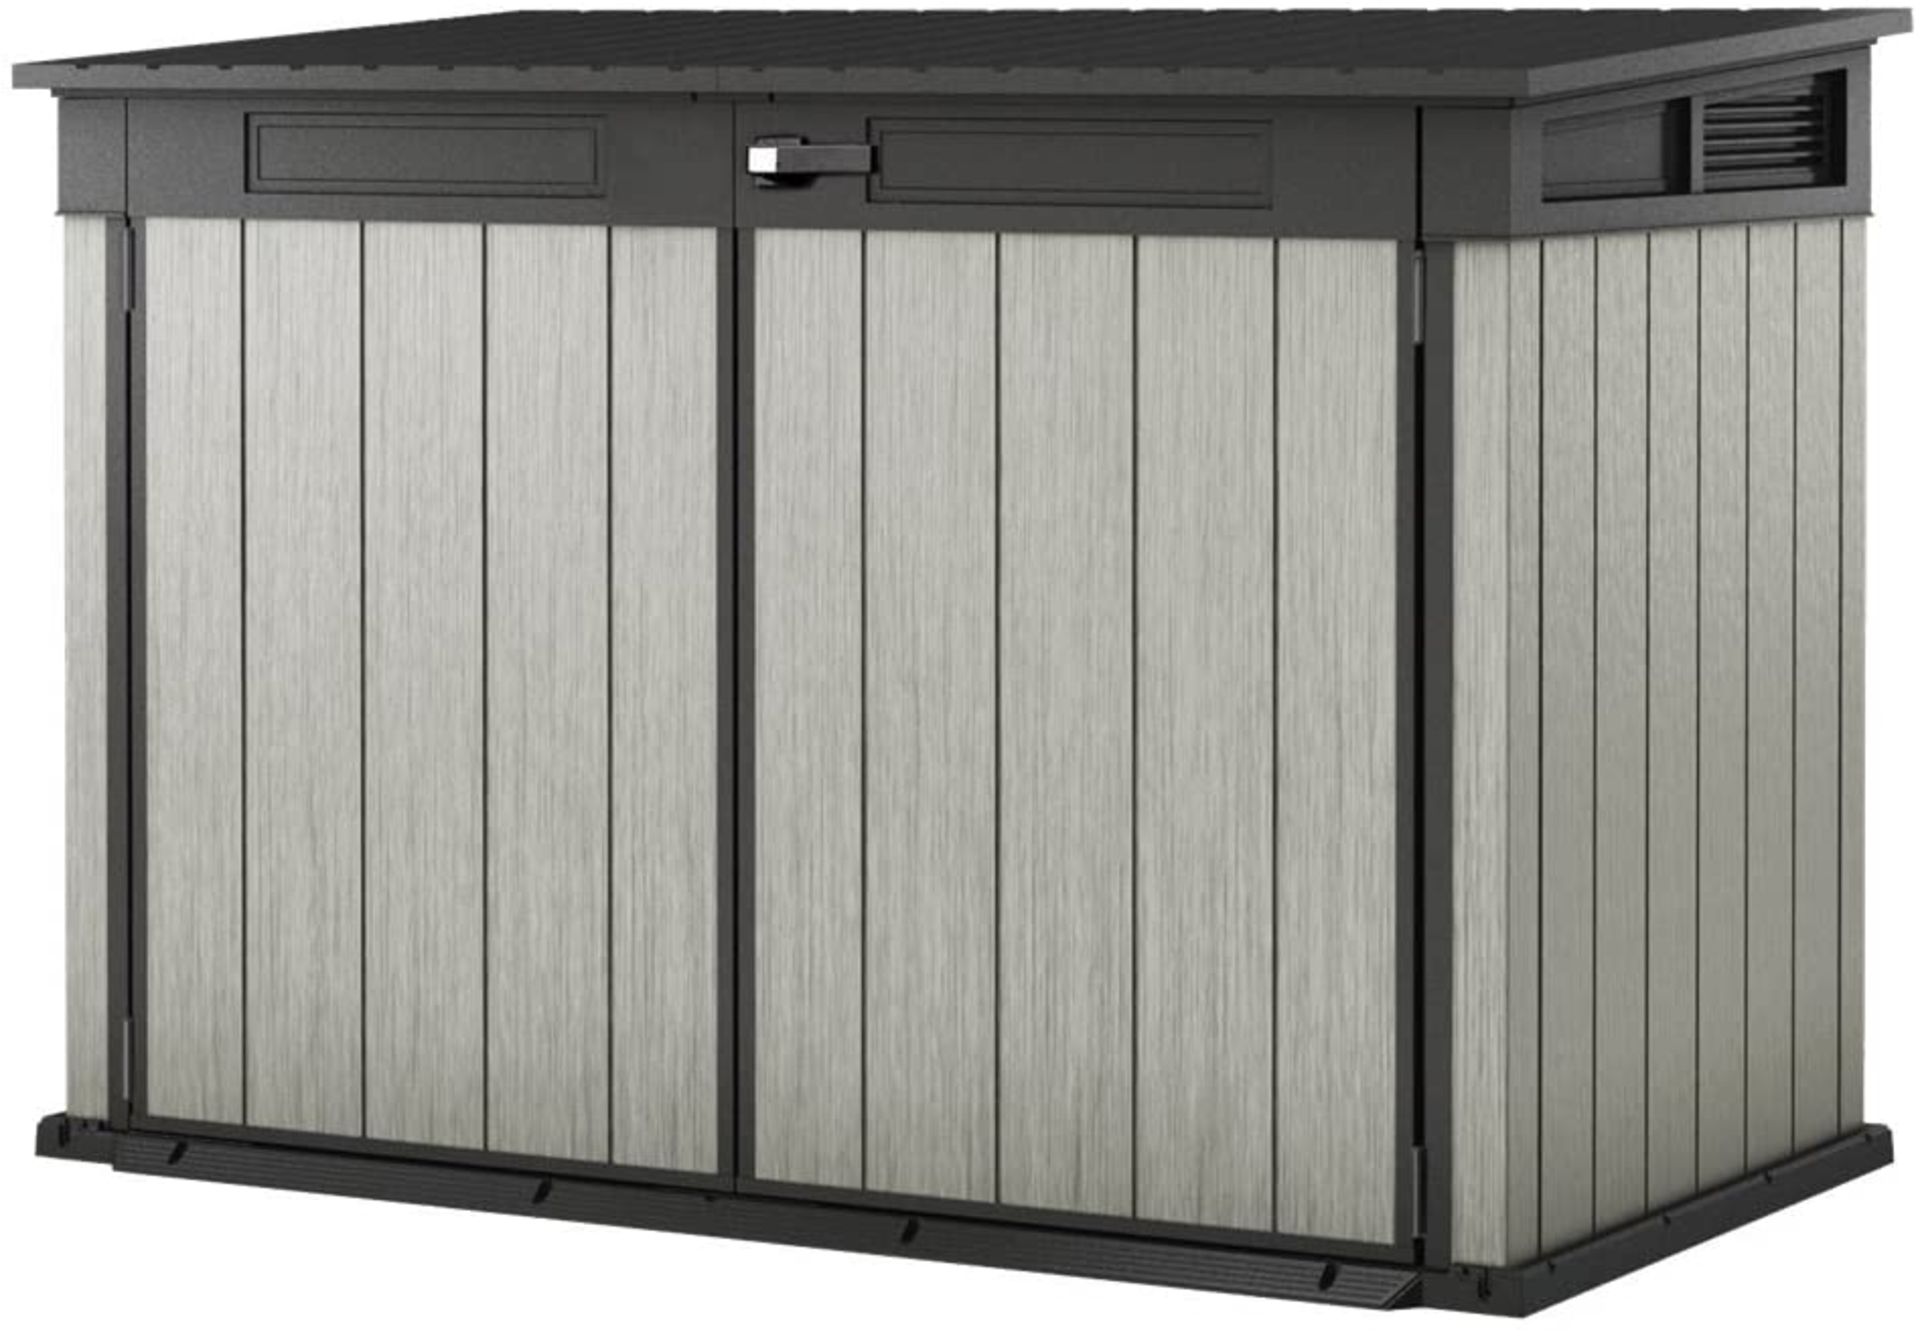 1 BOXED KETER GRANDE STORE 6FT 3" X 3FT 7" (1.9M X 1.1M) OUTDOOR PLASTIC GARDEN STORAGE SHED RRP Â£